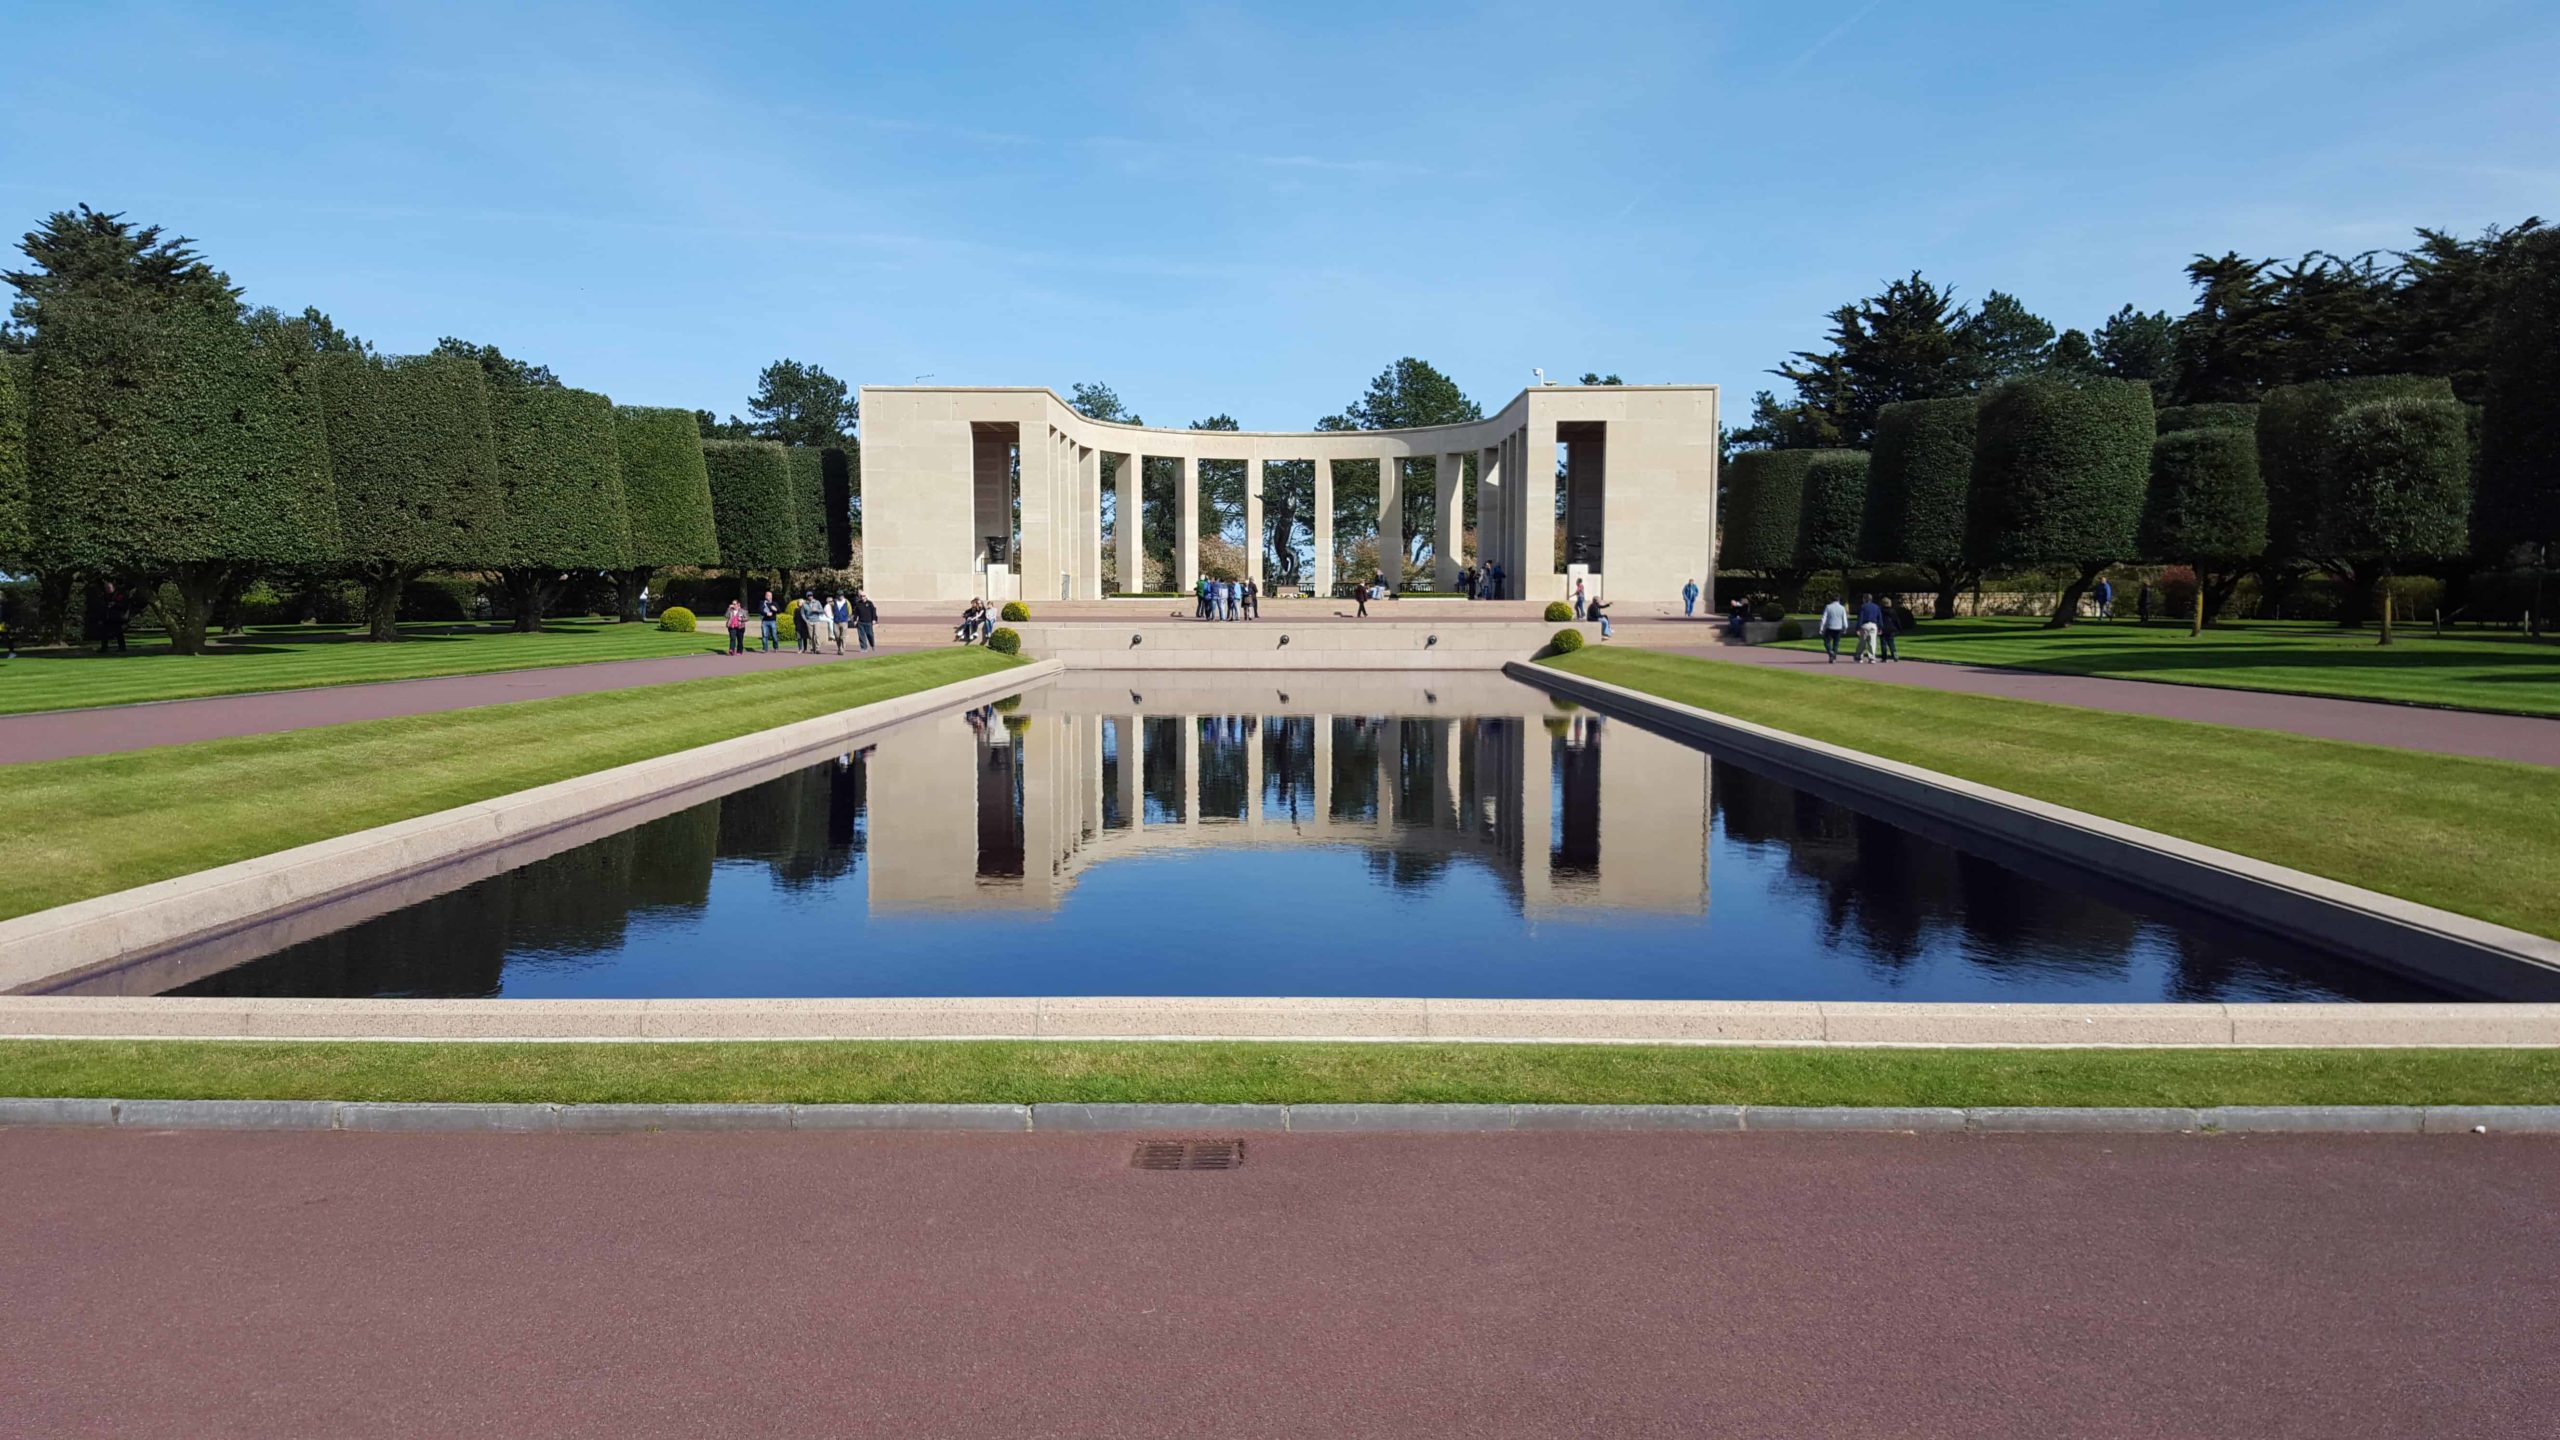 Liberation Route Europe Foundation strengthens ties with Normandy region